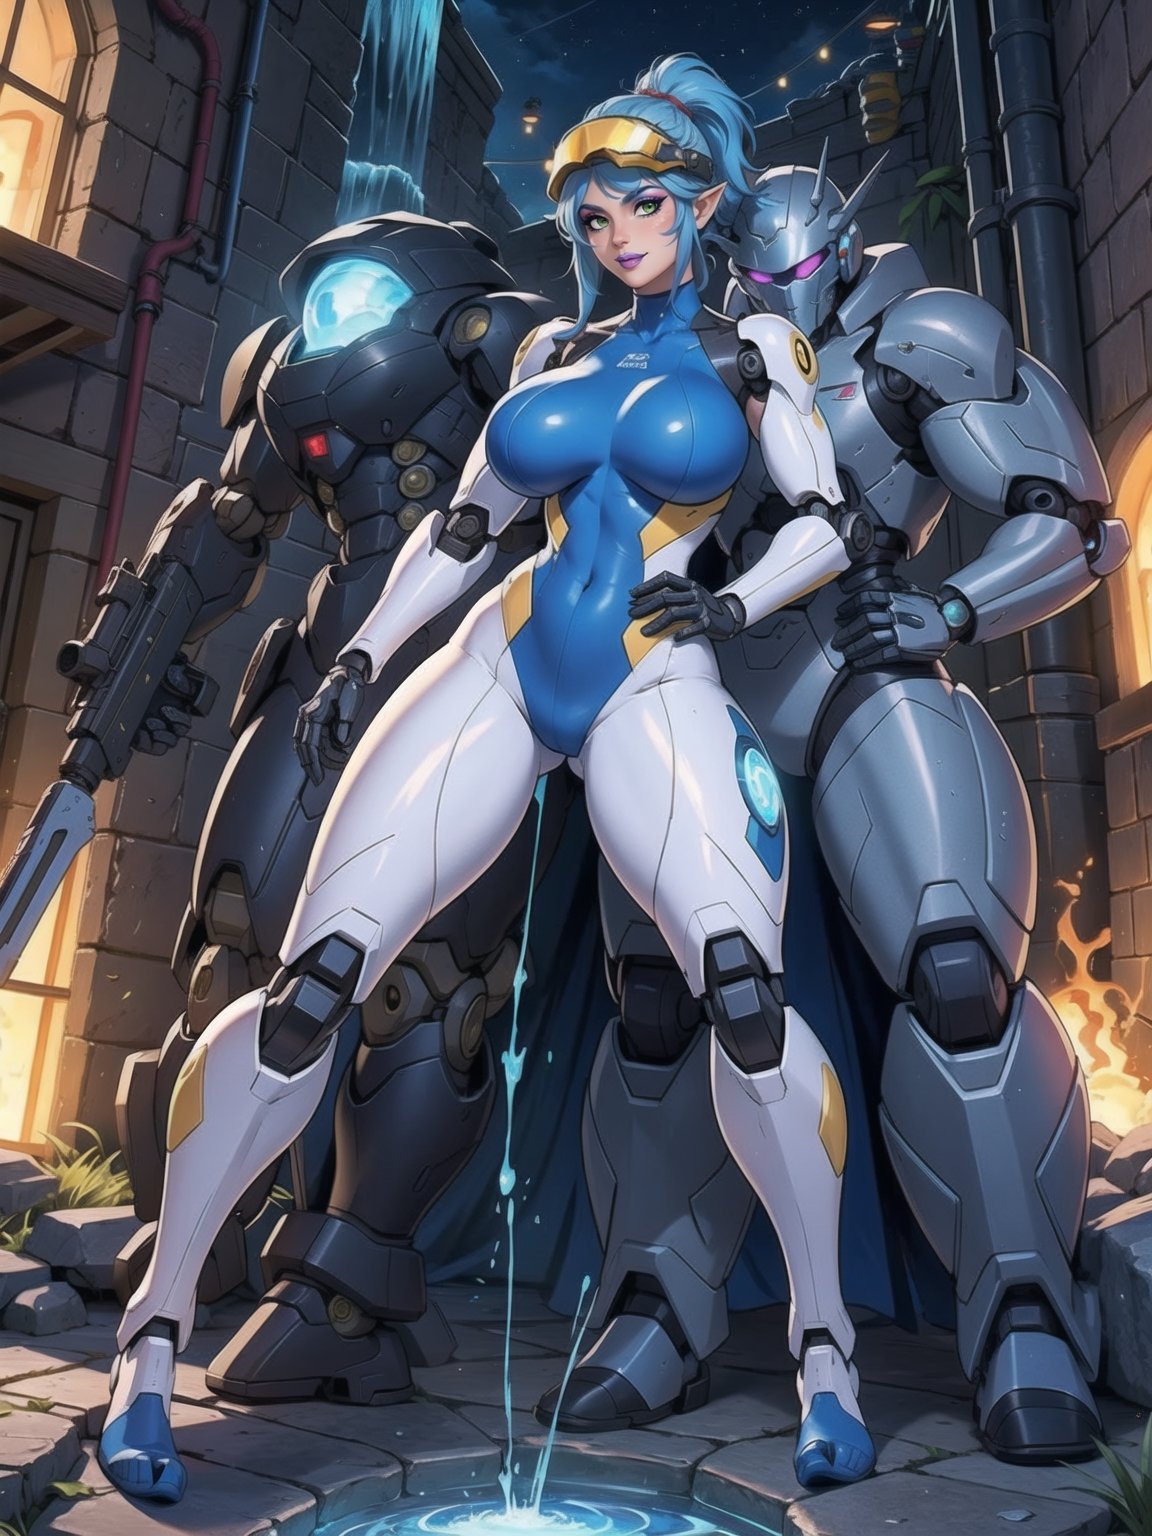 Solo female, ((wearing mecha suit+robotic suit completely white, with blue parts, more yellow lights, suit with attached weapons, gigantic breasts, wearing cybernetic helmet with visor)), mohawk hair, blue hair, messy hair, hair with ponytail, looking directly at the viewer, she is, in a dungeon, with a waterfall, large stone altars, stone structures, machines, robots, large altars of ancient gods, figurines, Super Metroid, ultra technological, Zelda, Final Fantasy, worldofwarcraft, (full body:1.5), 16K, UHD, Unreal Engine 5, quality max, max resolution, maximum sharpness, (((sensual pose with interaction and leaning on anything + object + on something + leaning against))) + ((perfect_thighs, perfect_legs, perfect_feet)), better_hands, More detail, 